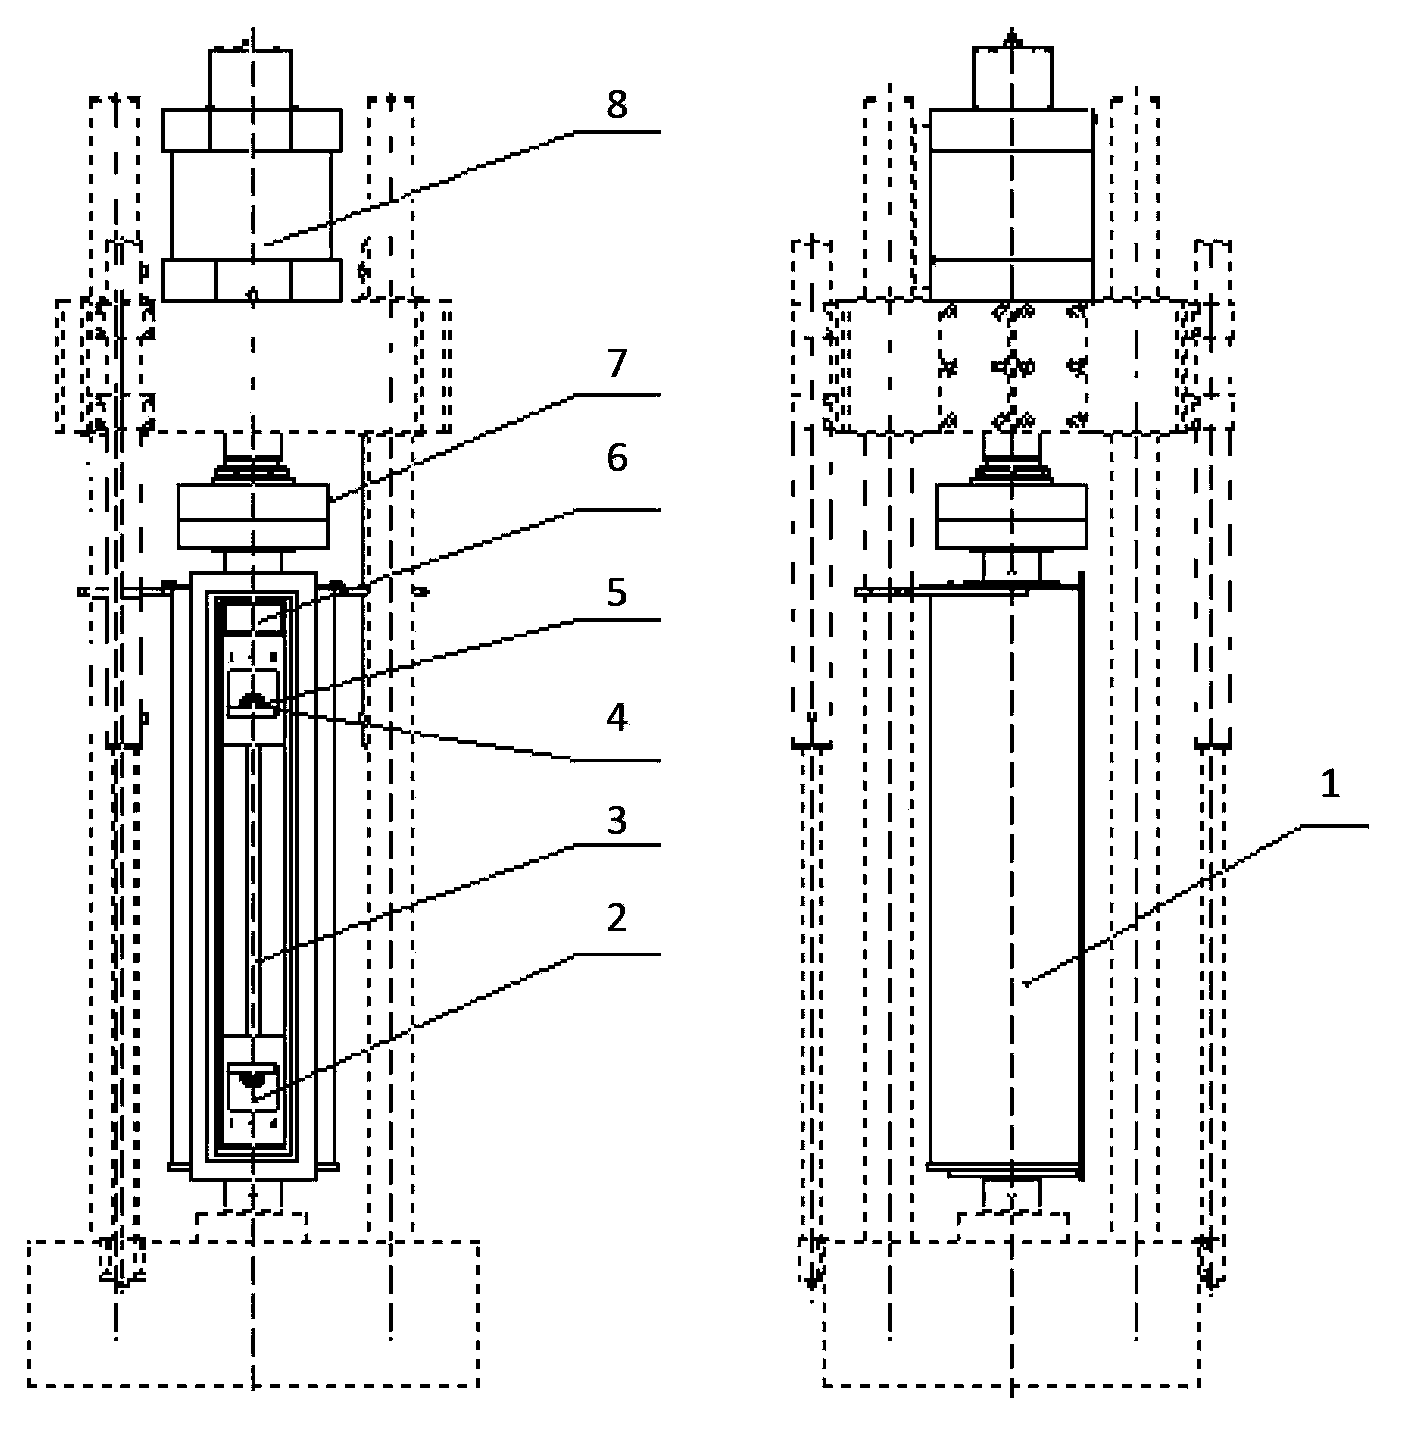 Large low-temperature fatigue experimental device for bolt